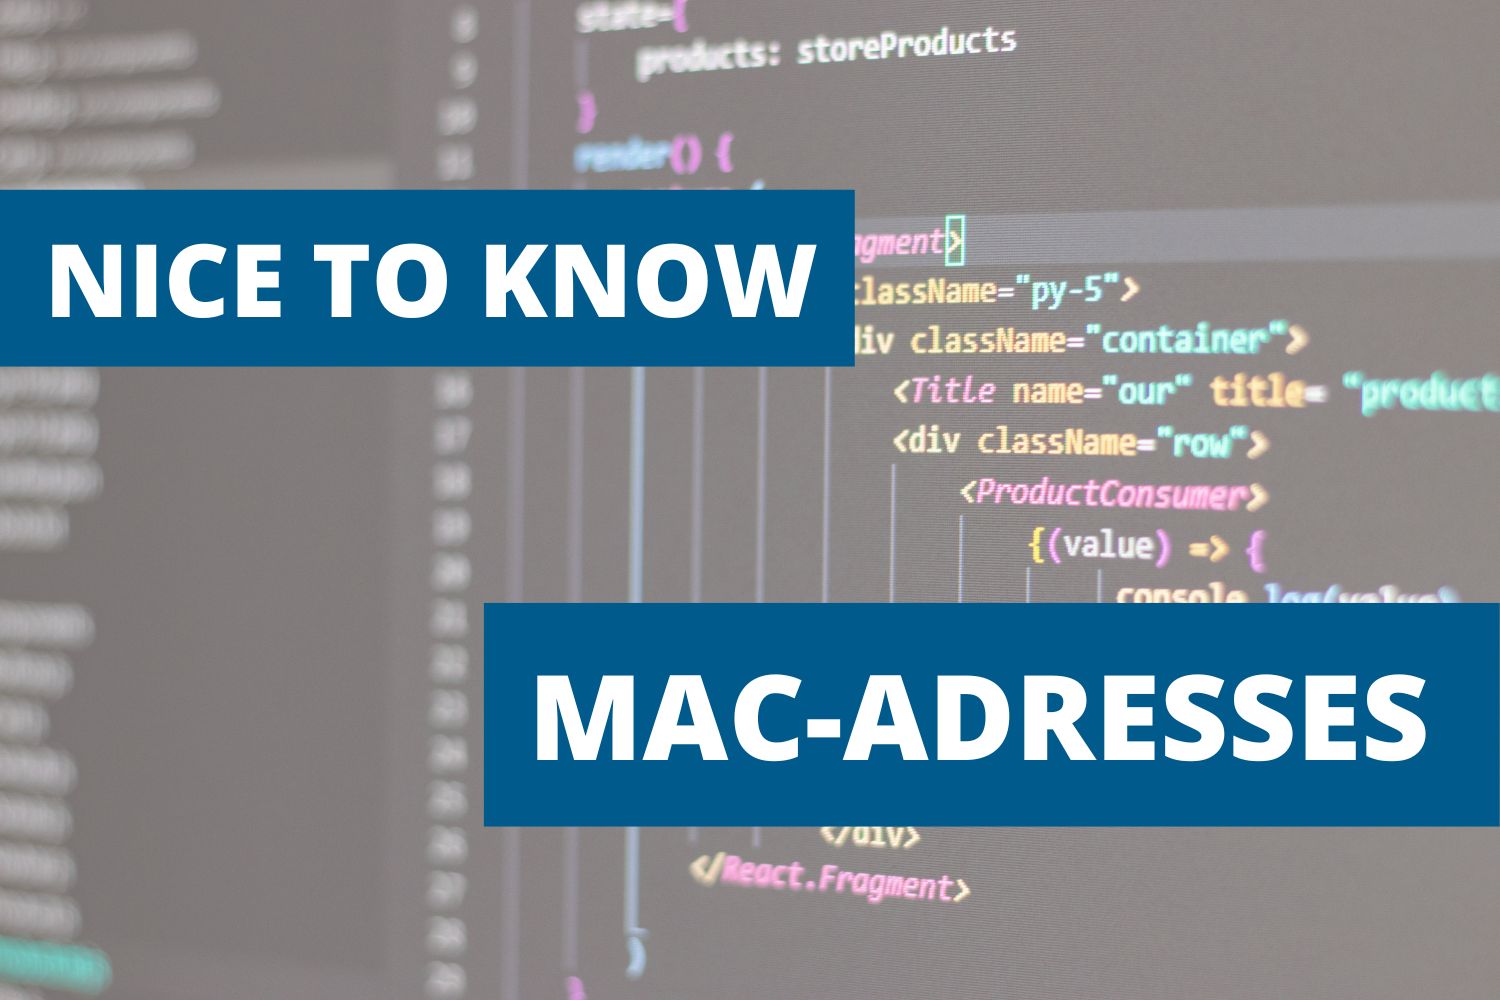 Nice to know: What are MAC addresses?